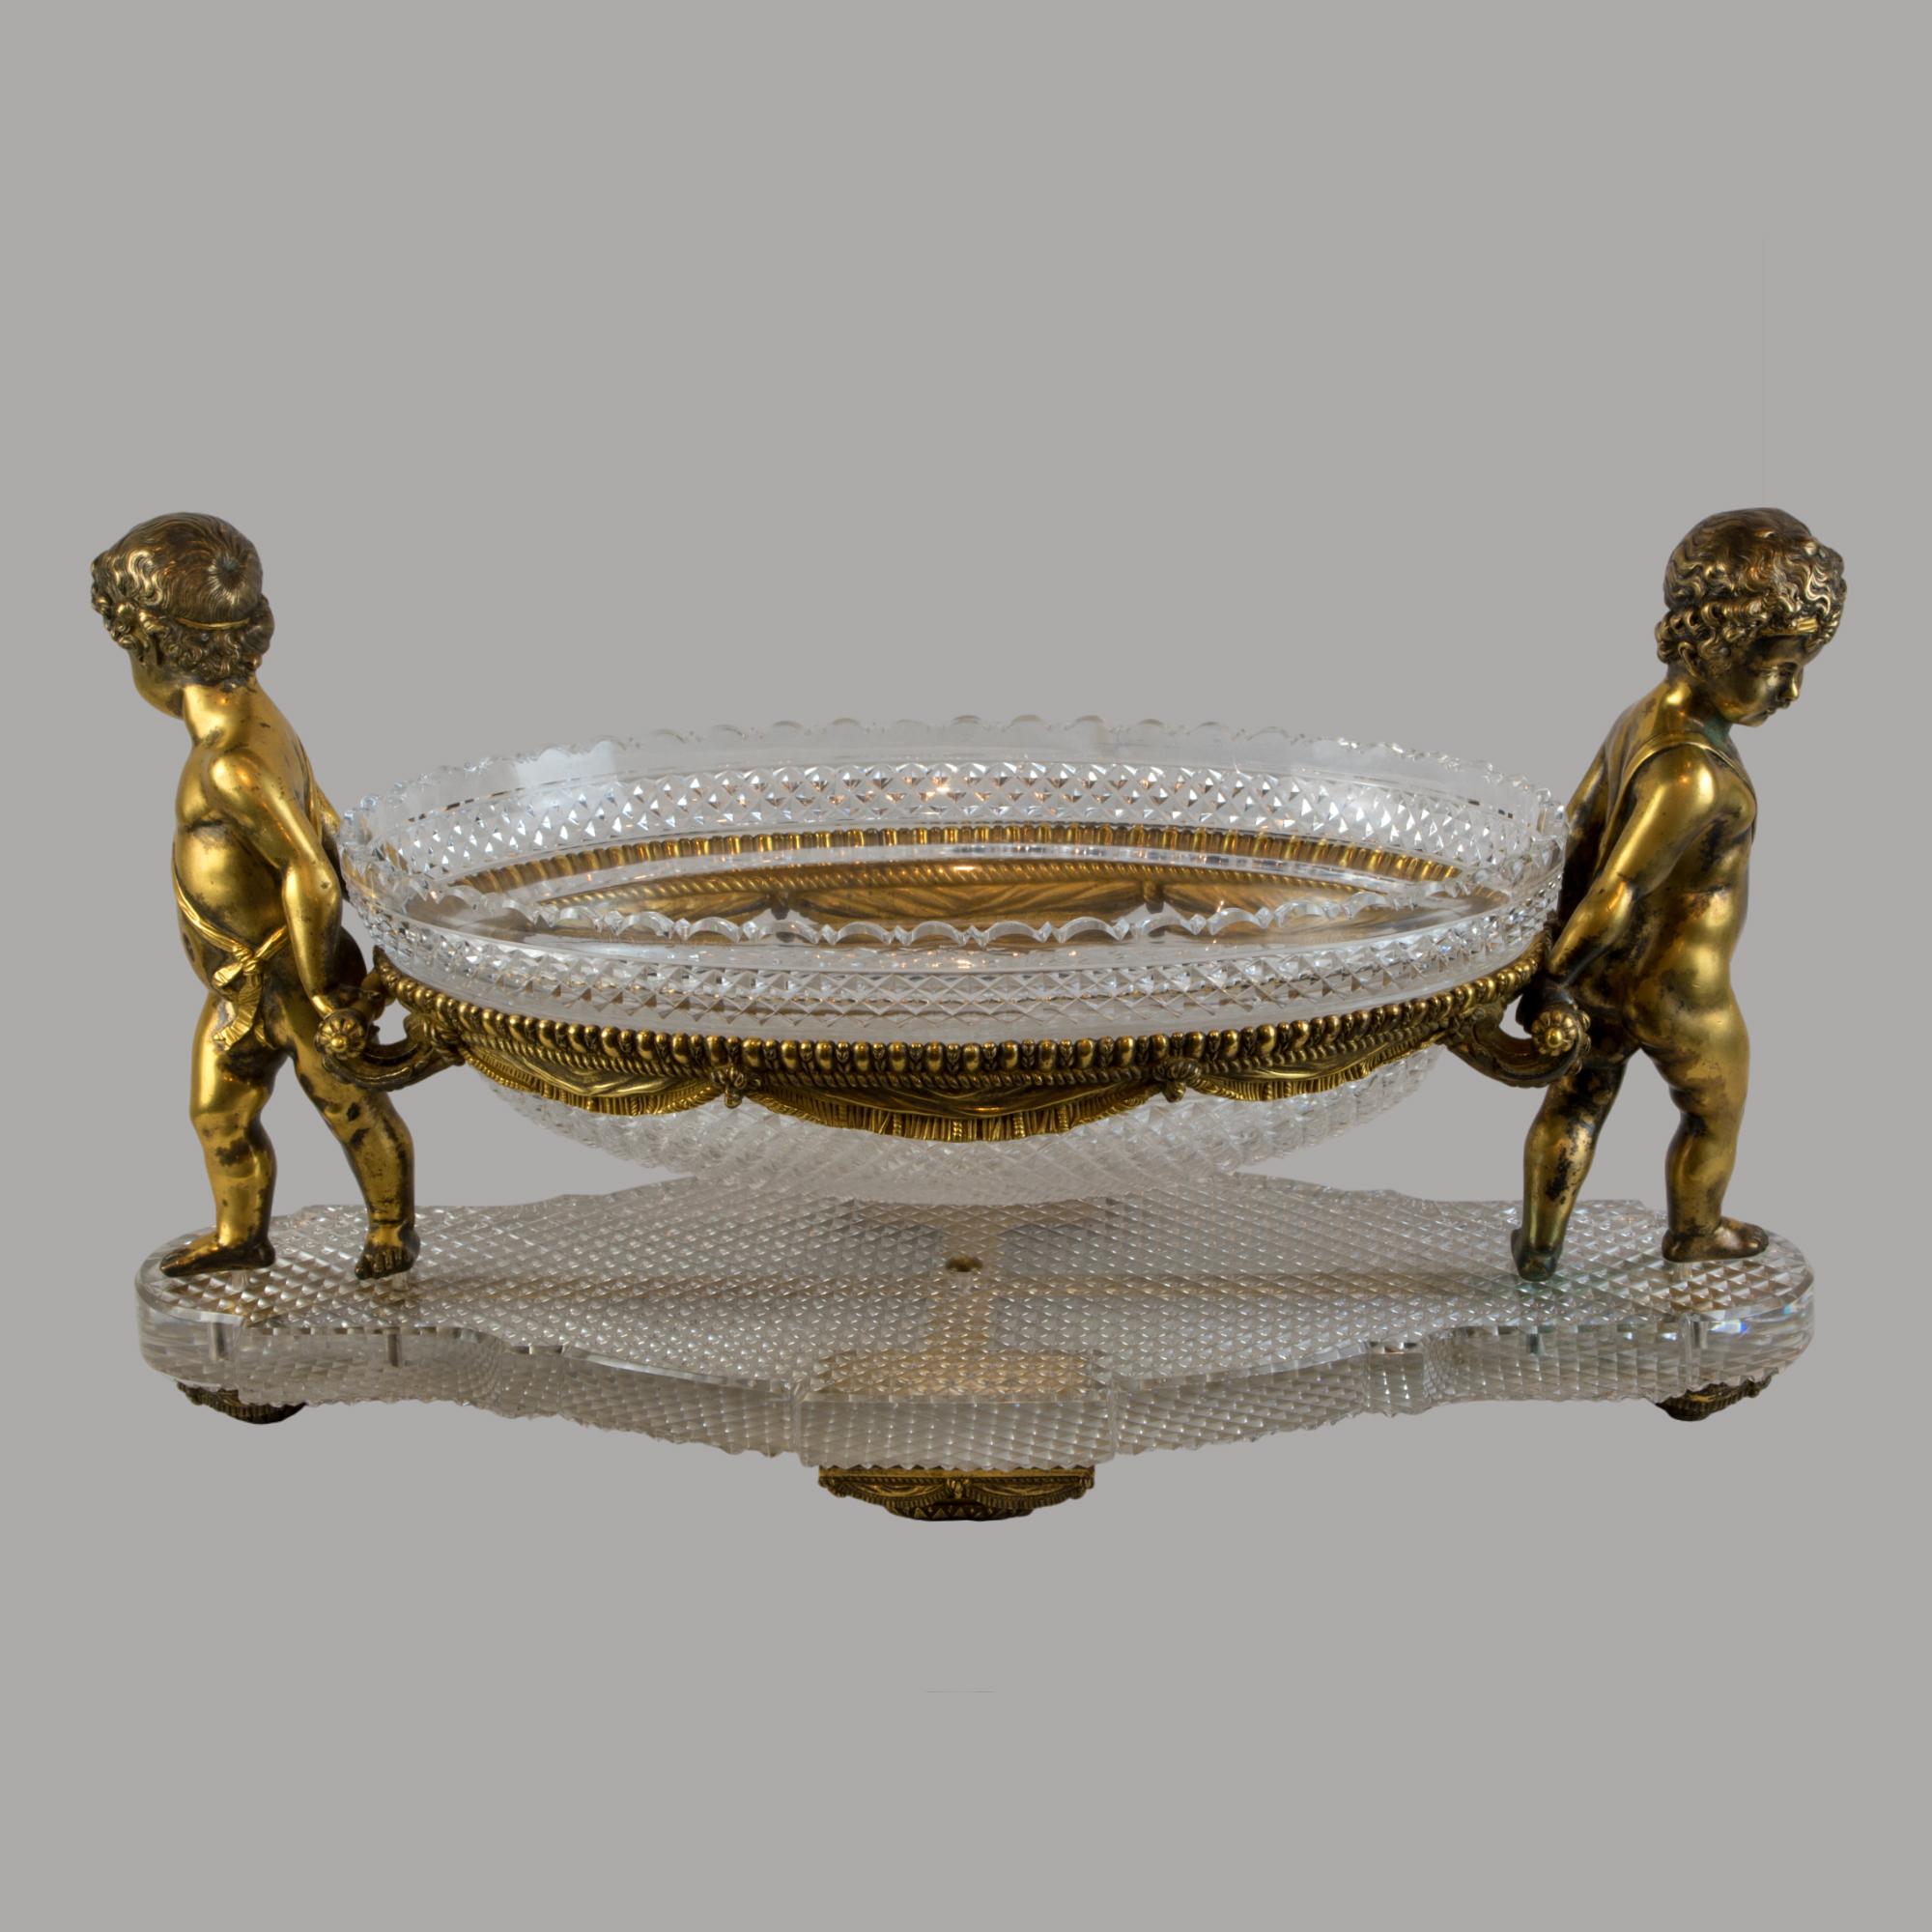 Important Louis XVI Style Gilt-Bronze and Cut Glass Figural Centerpiece att. to Baccarat 

An important centerpiece reflective of French luxury, in the opulent Louis XVI style, attributed to the esteemed Baccarat house, dating back to the 19th